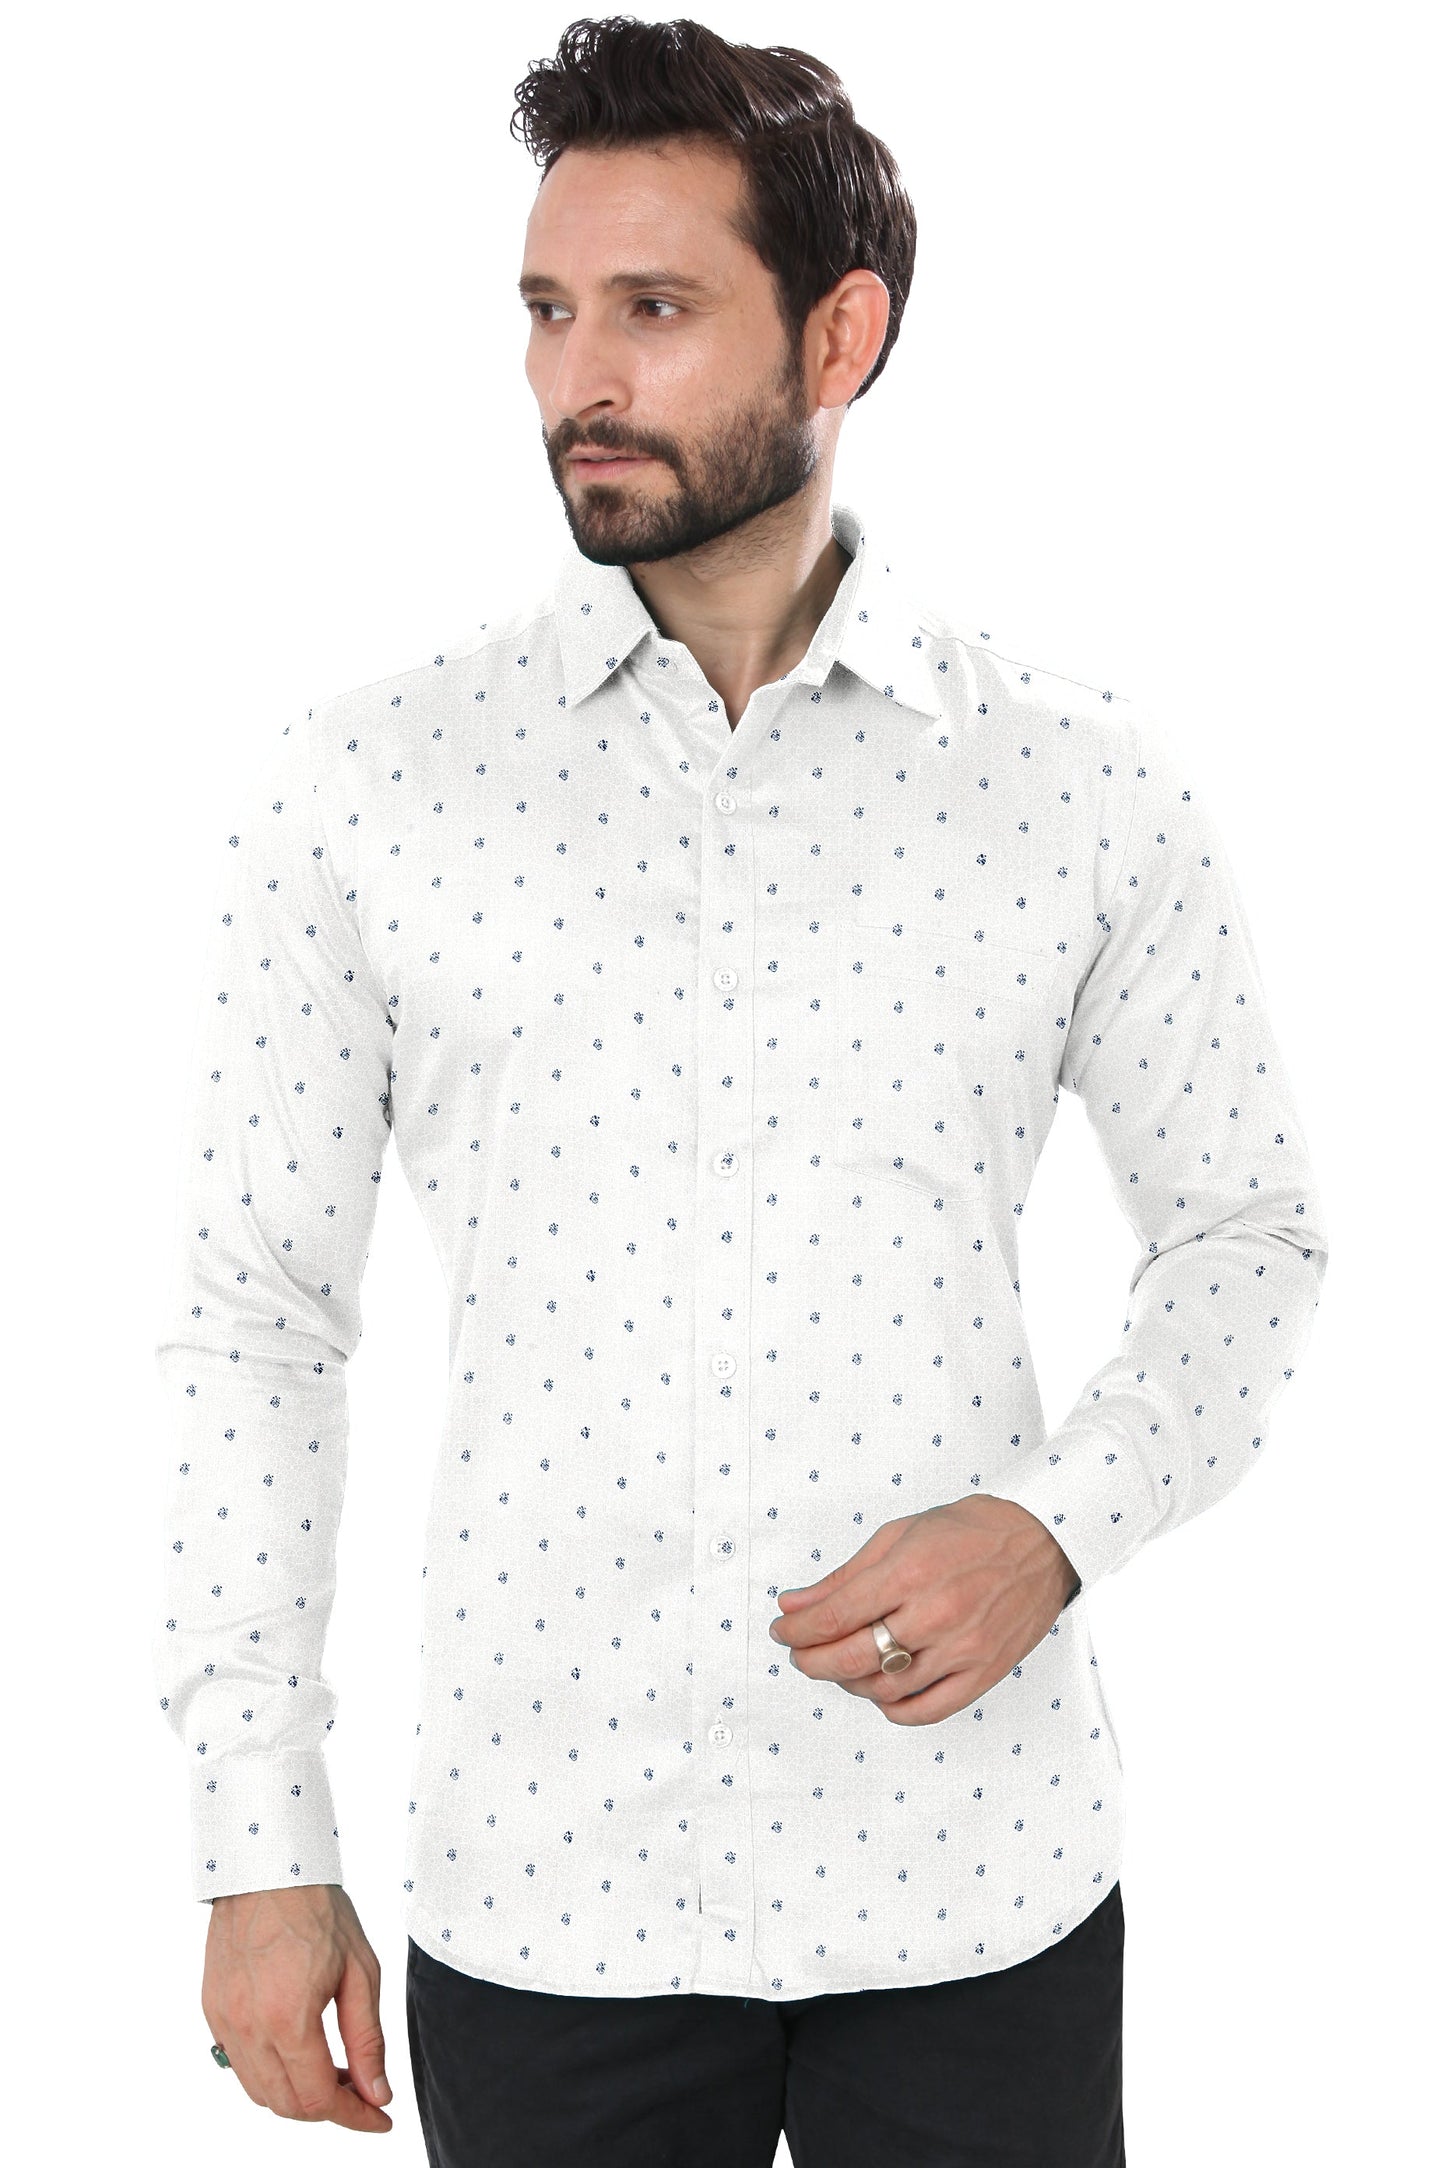 Men's White Printed Design Casual Full Sleeves 100% Cotton 